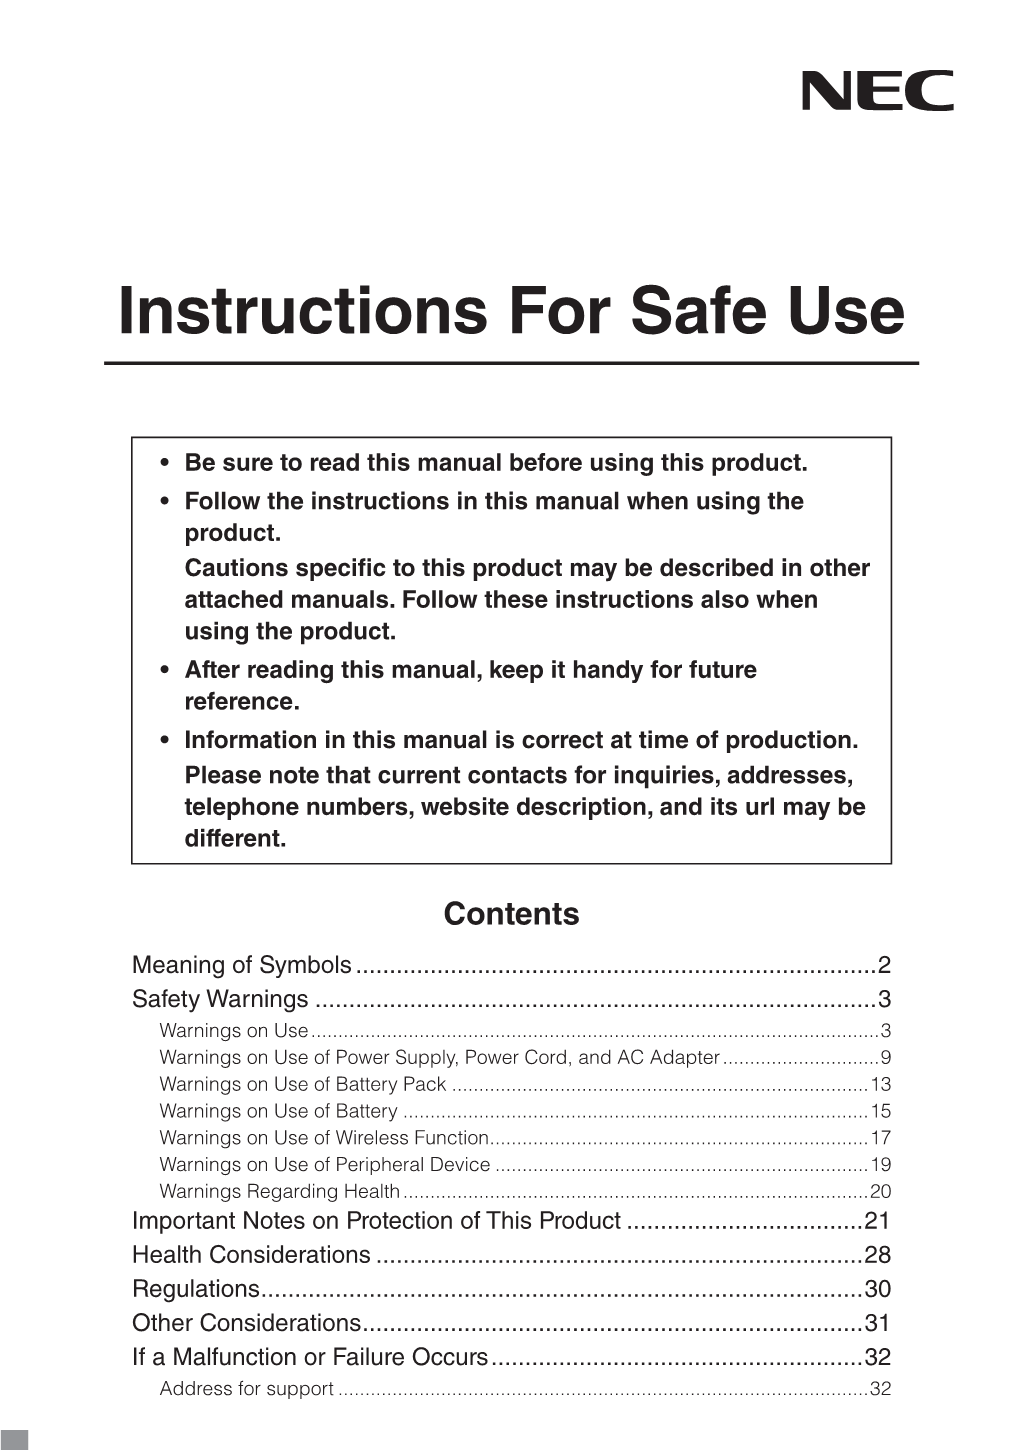 Instructions for Safe Use